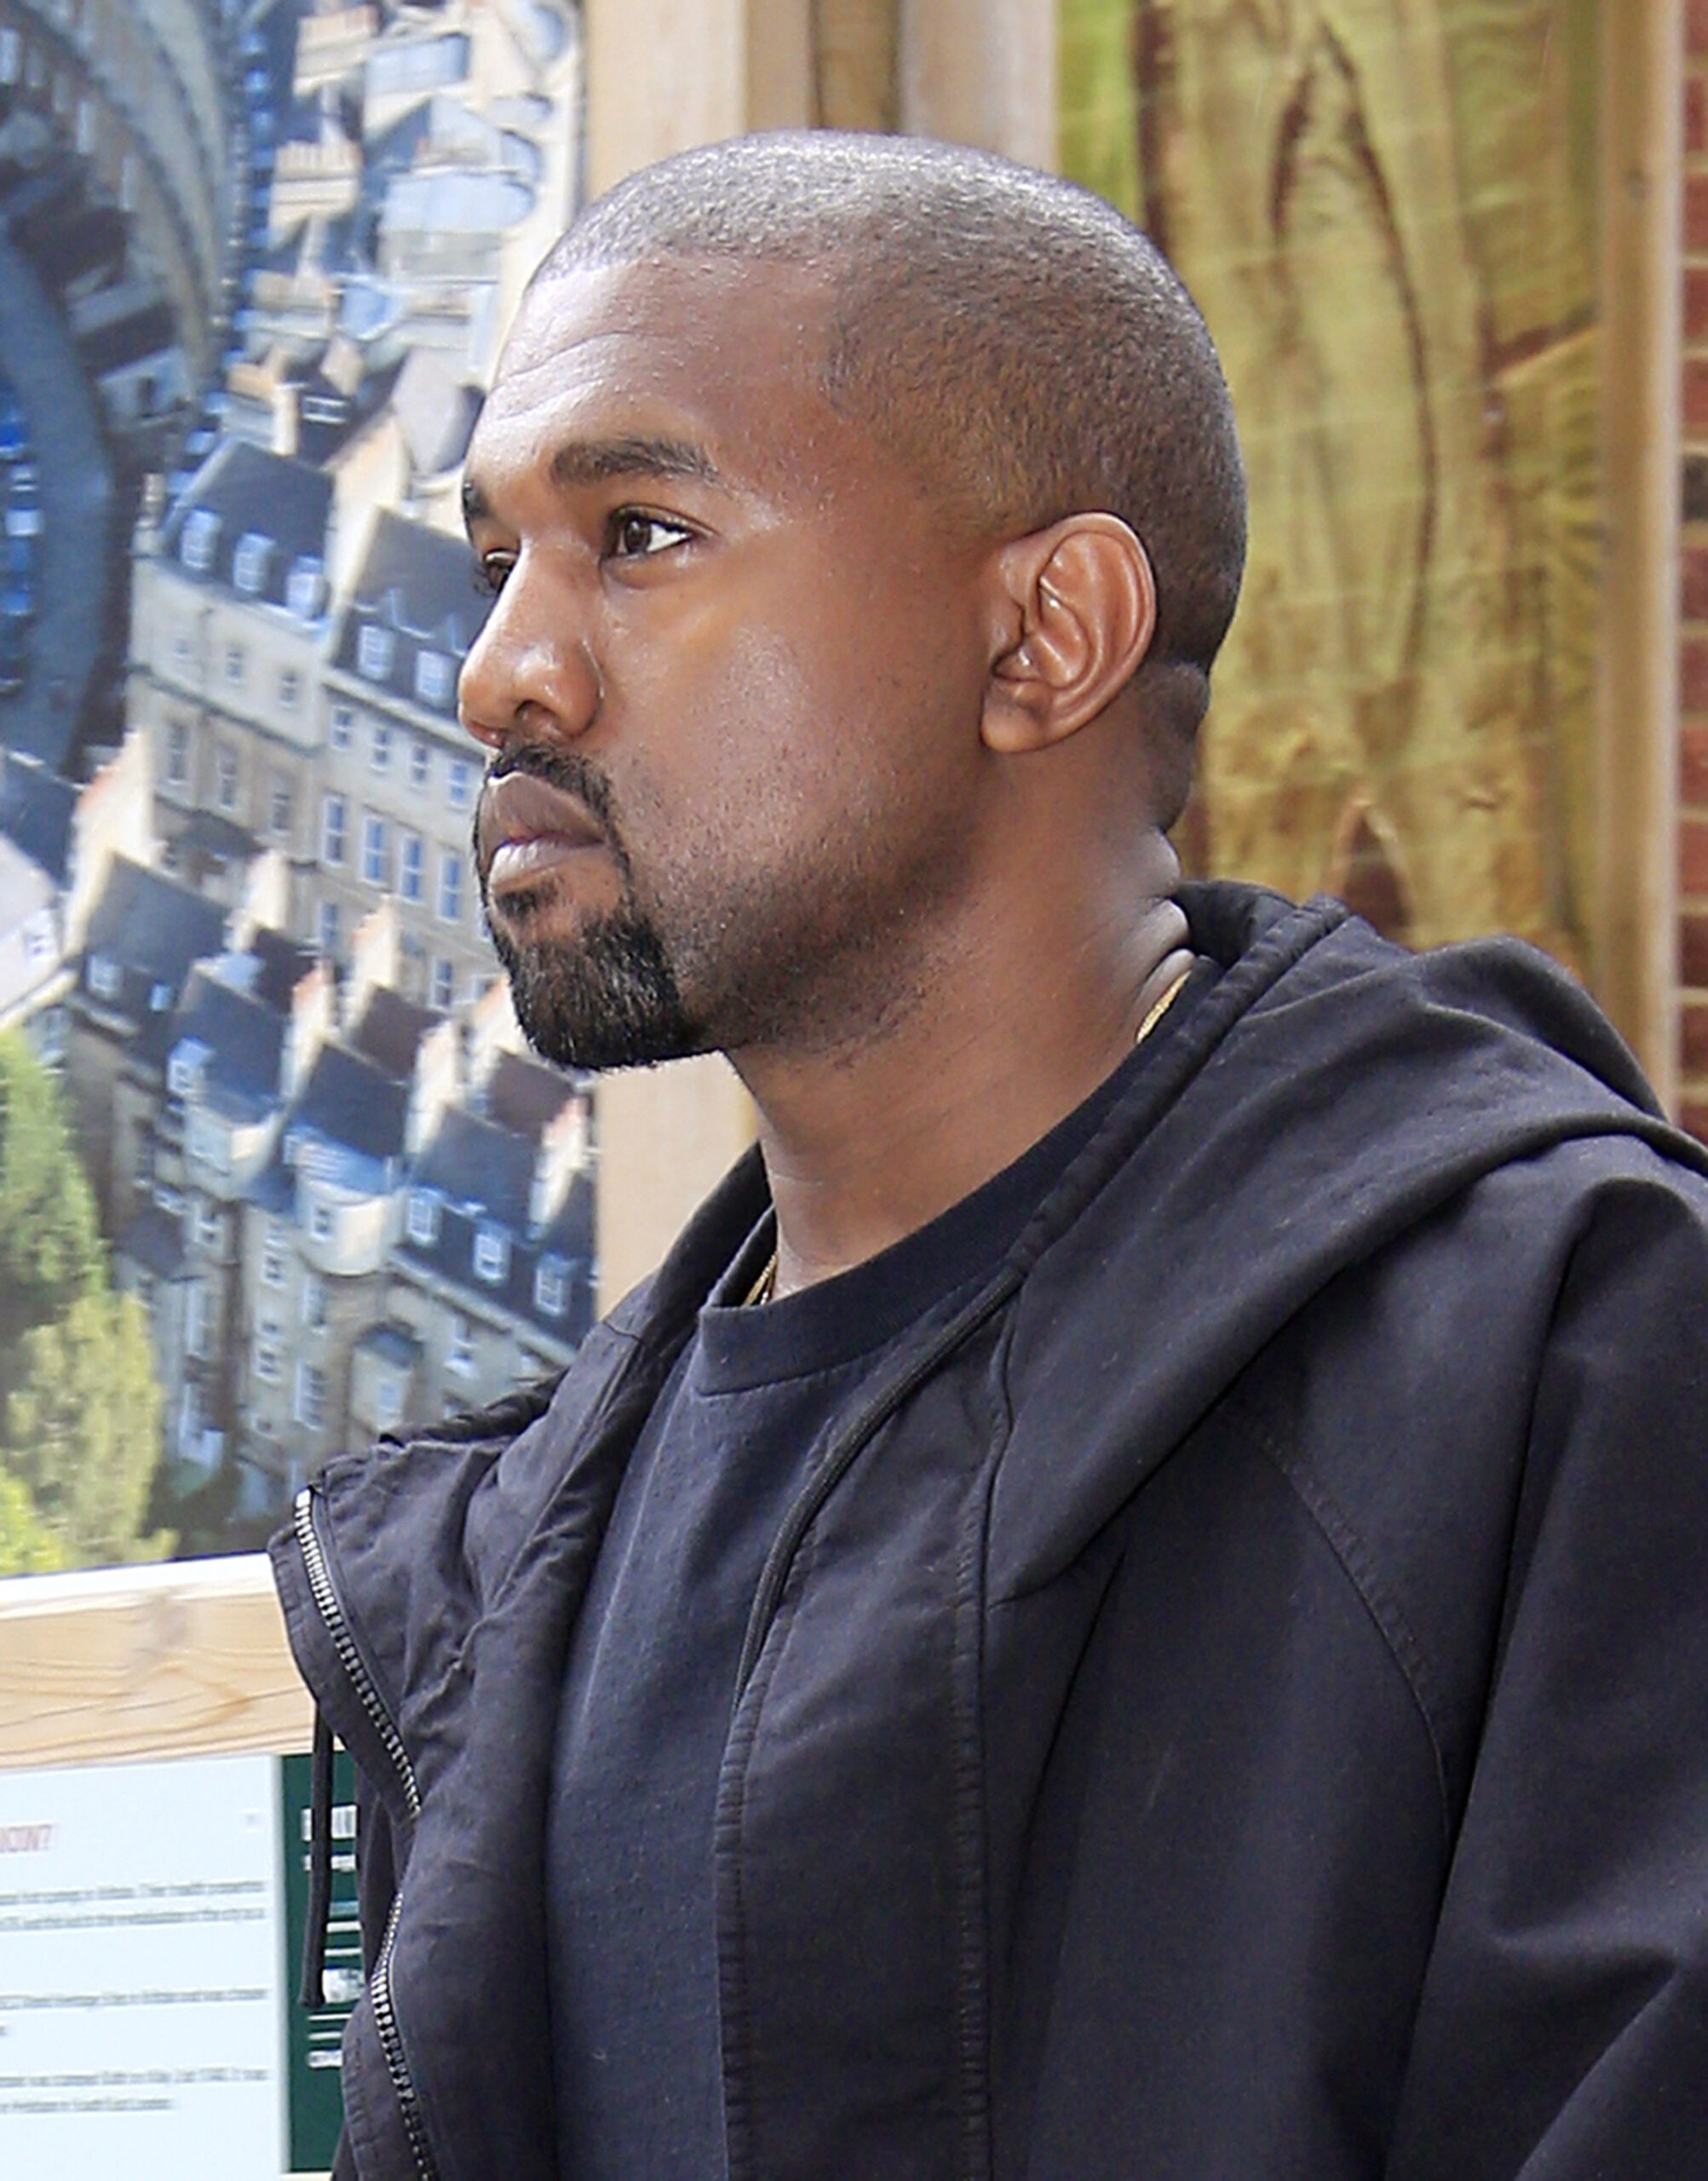 Kanye West wears a dark blue jacket and T-shirt, looking ahead.